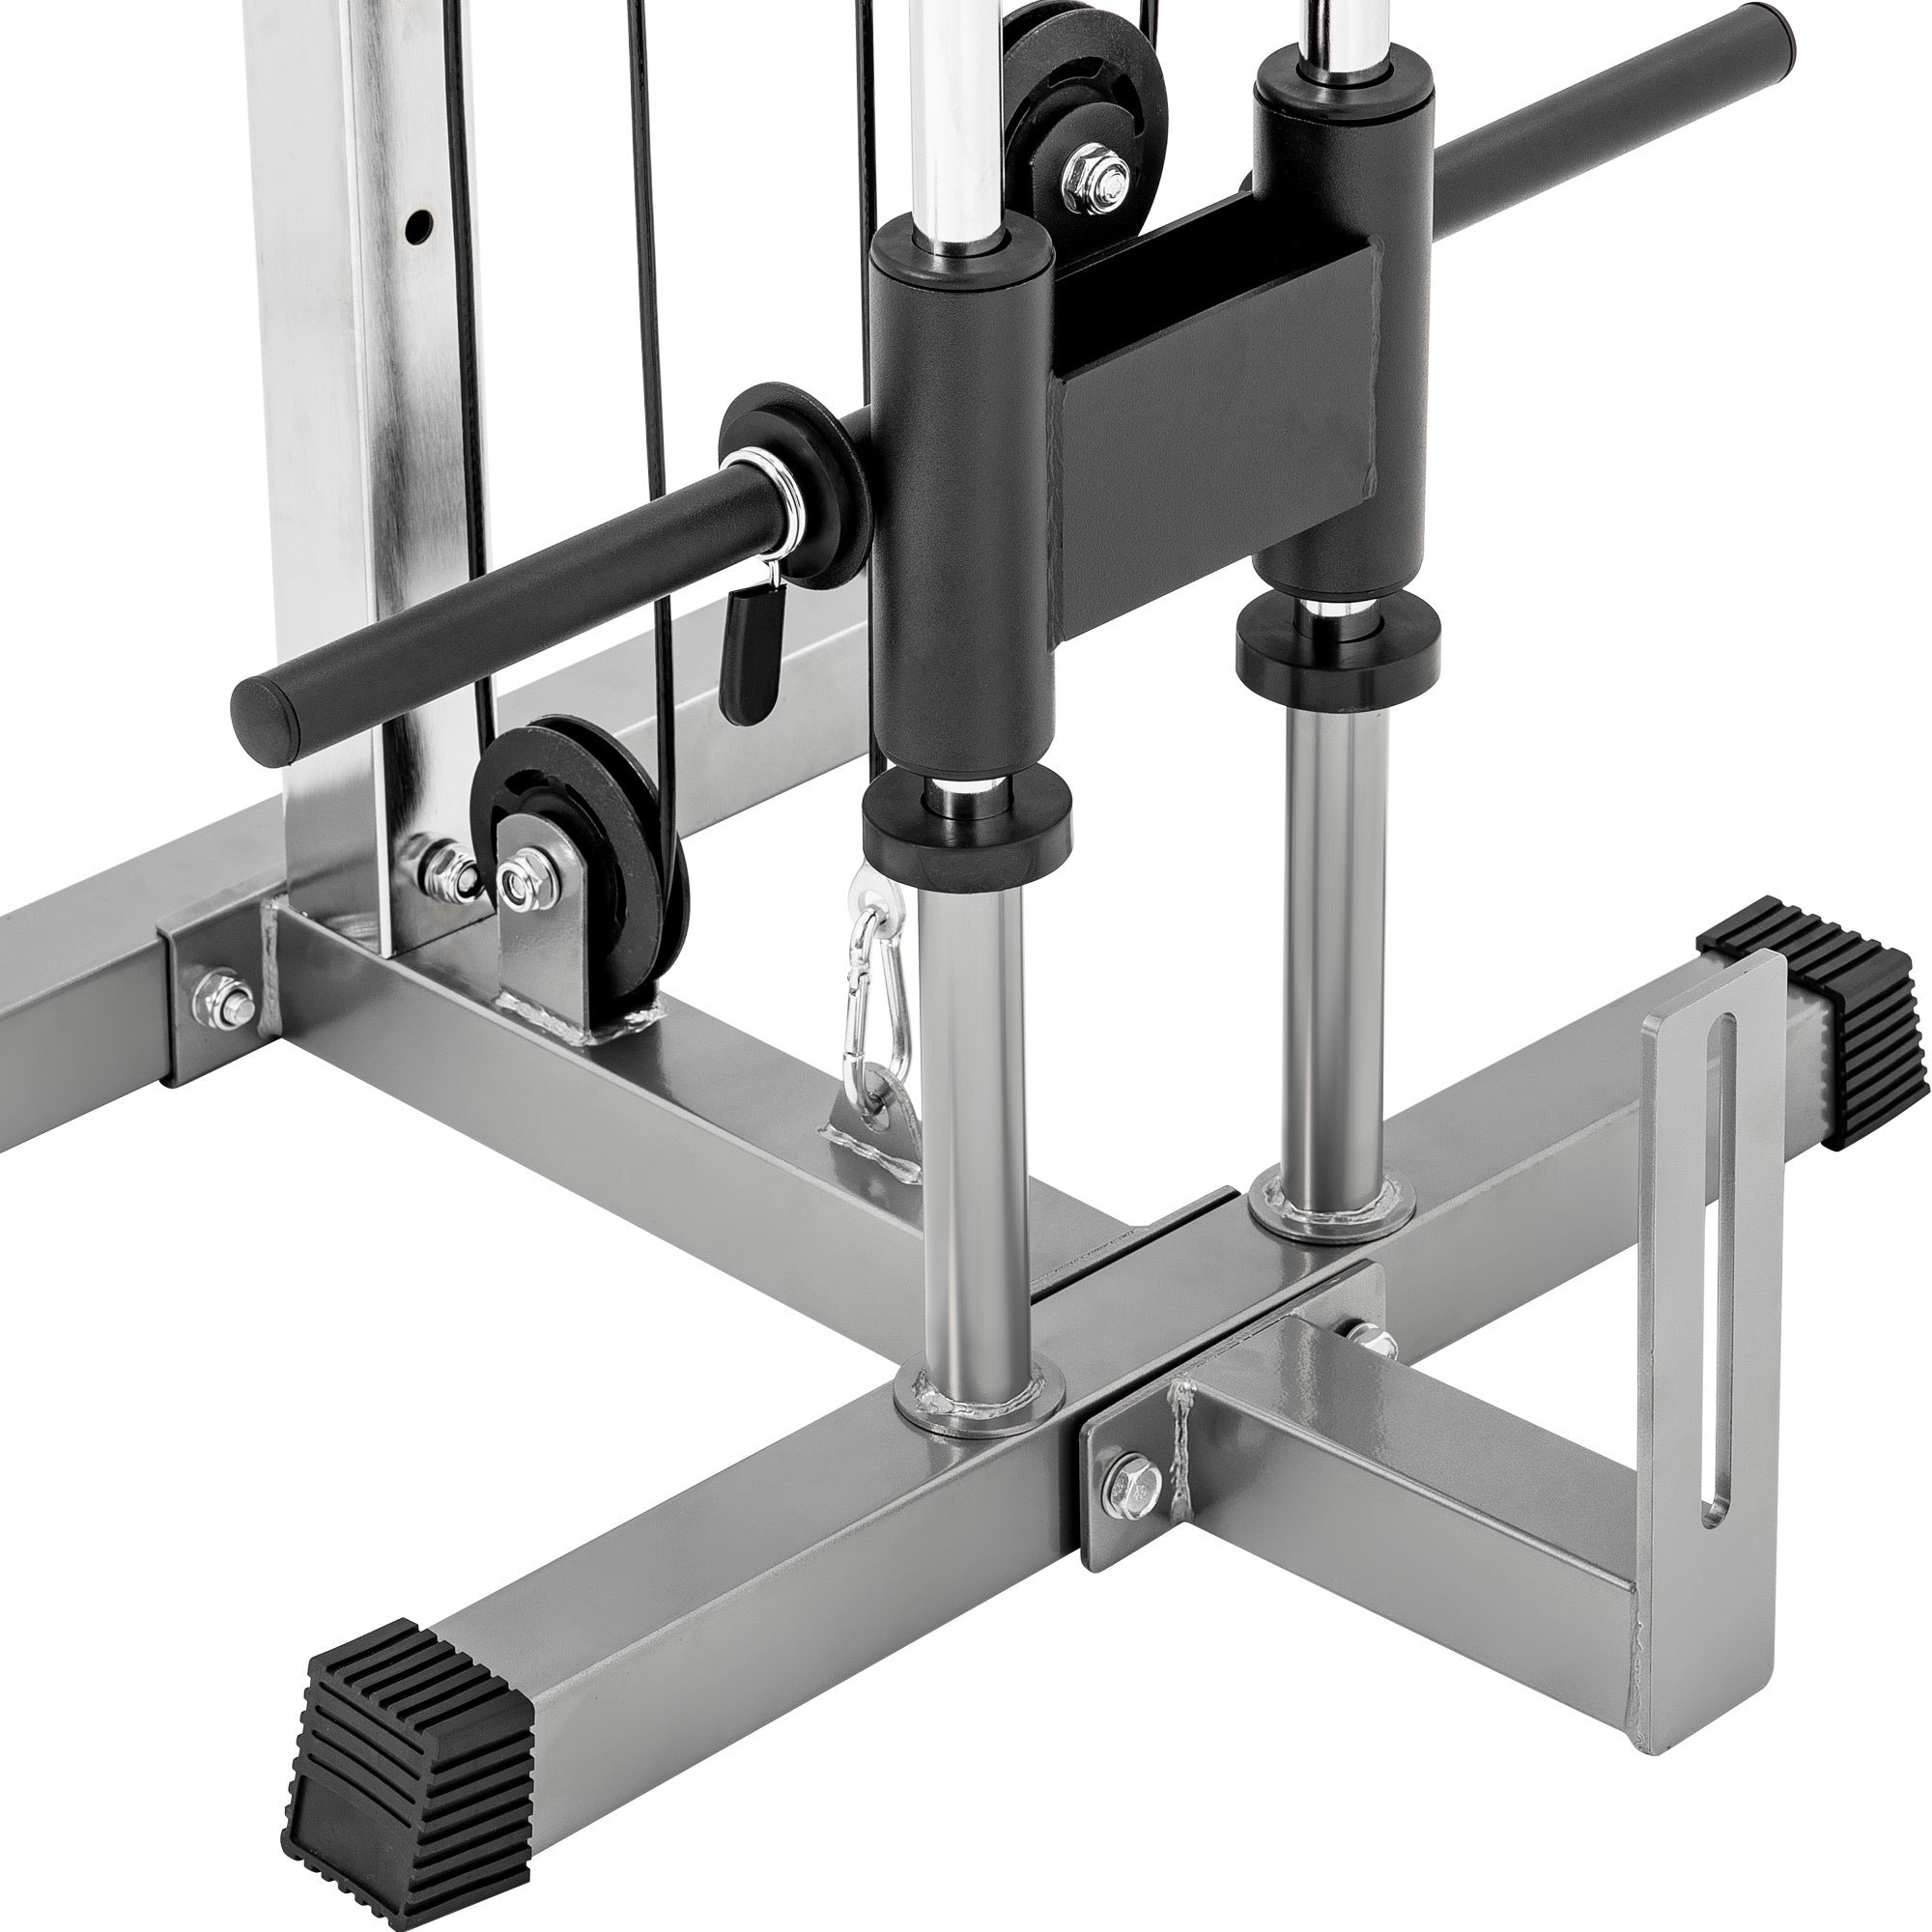 Lat Pulldown Machine Home Gym Fitness